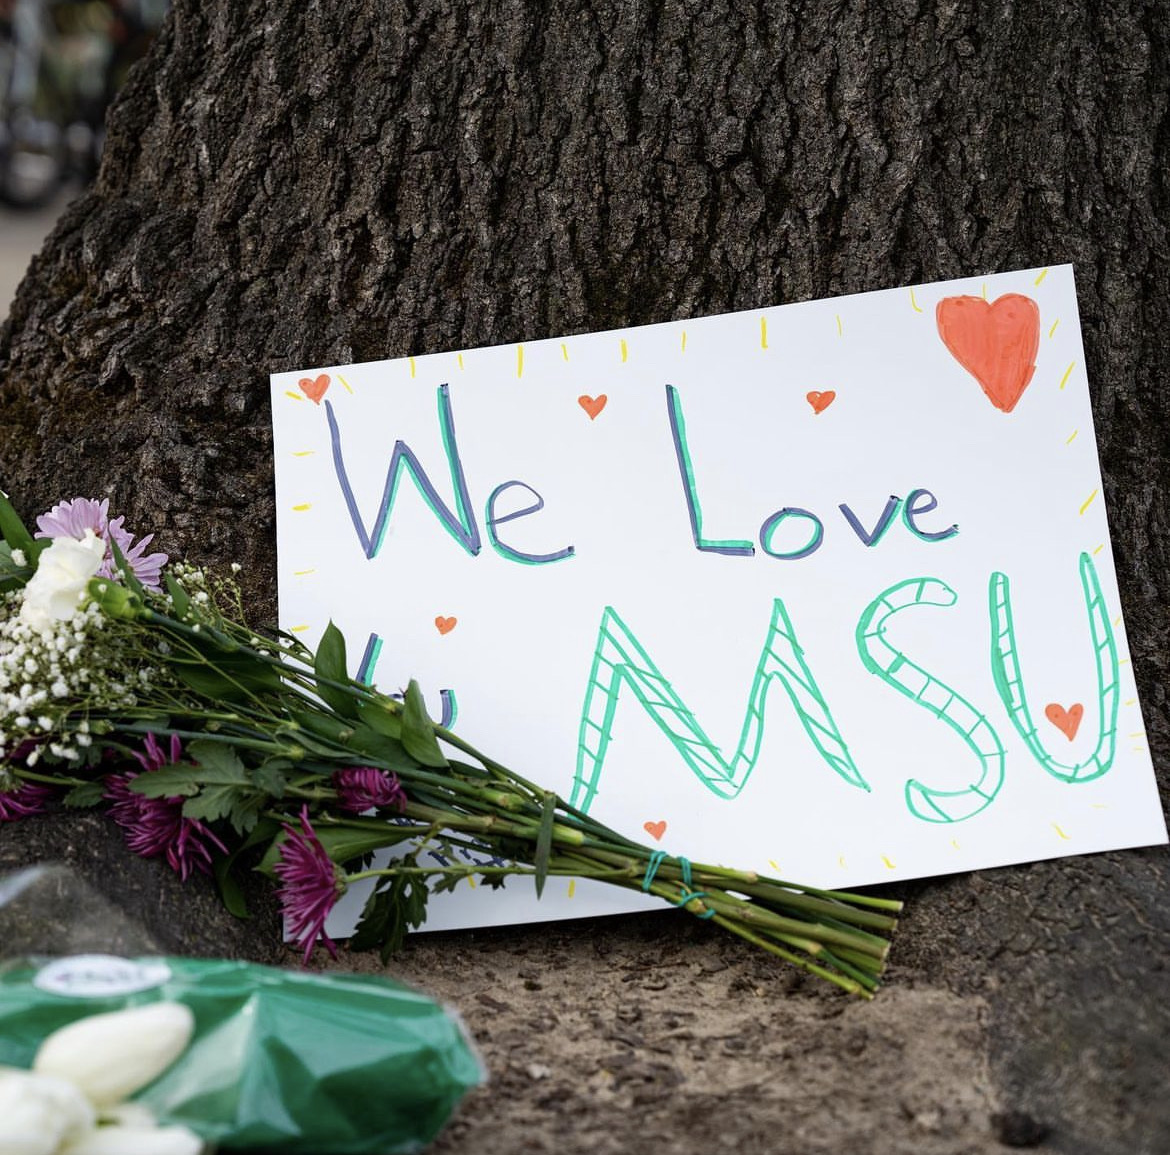 Notes of encouragement placed with flowers on the campus at Michigan State University.